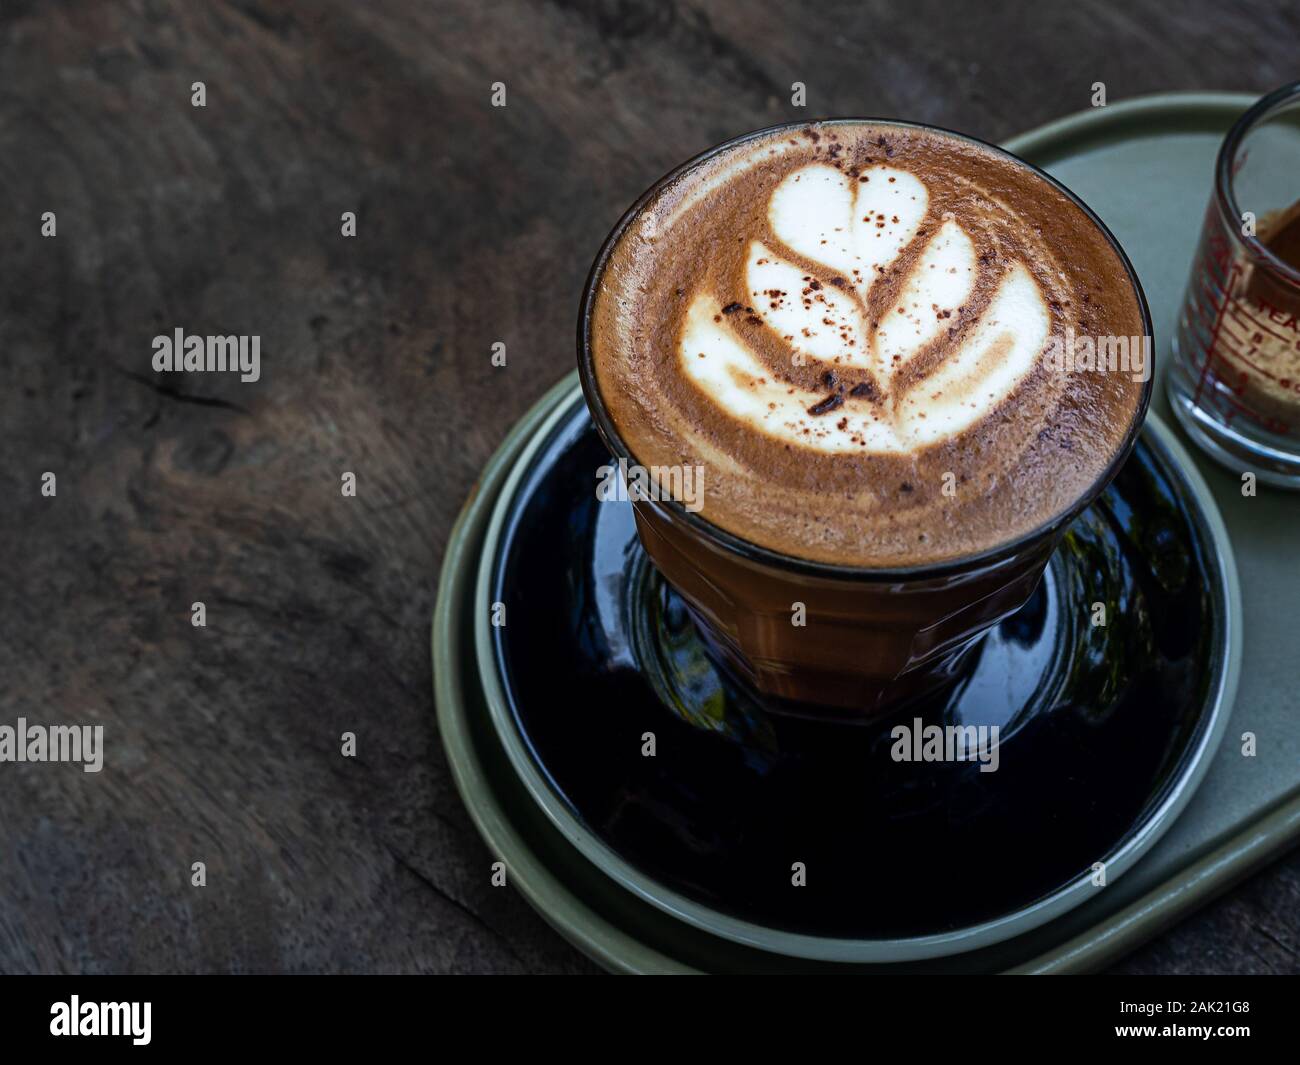 https://c8.alamy.com/comp/2AK21G8/mocha-coffee-with-latte-art-in-glass-on-wooden-table-background-minimal-style-2AK21G8.jpg